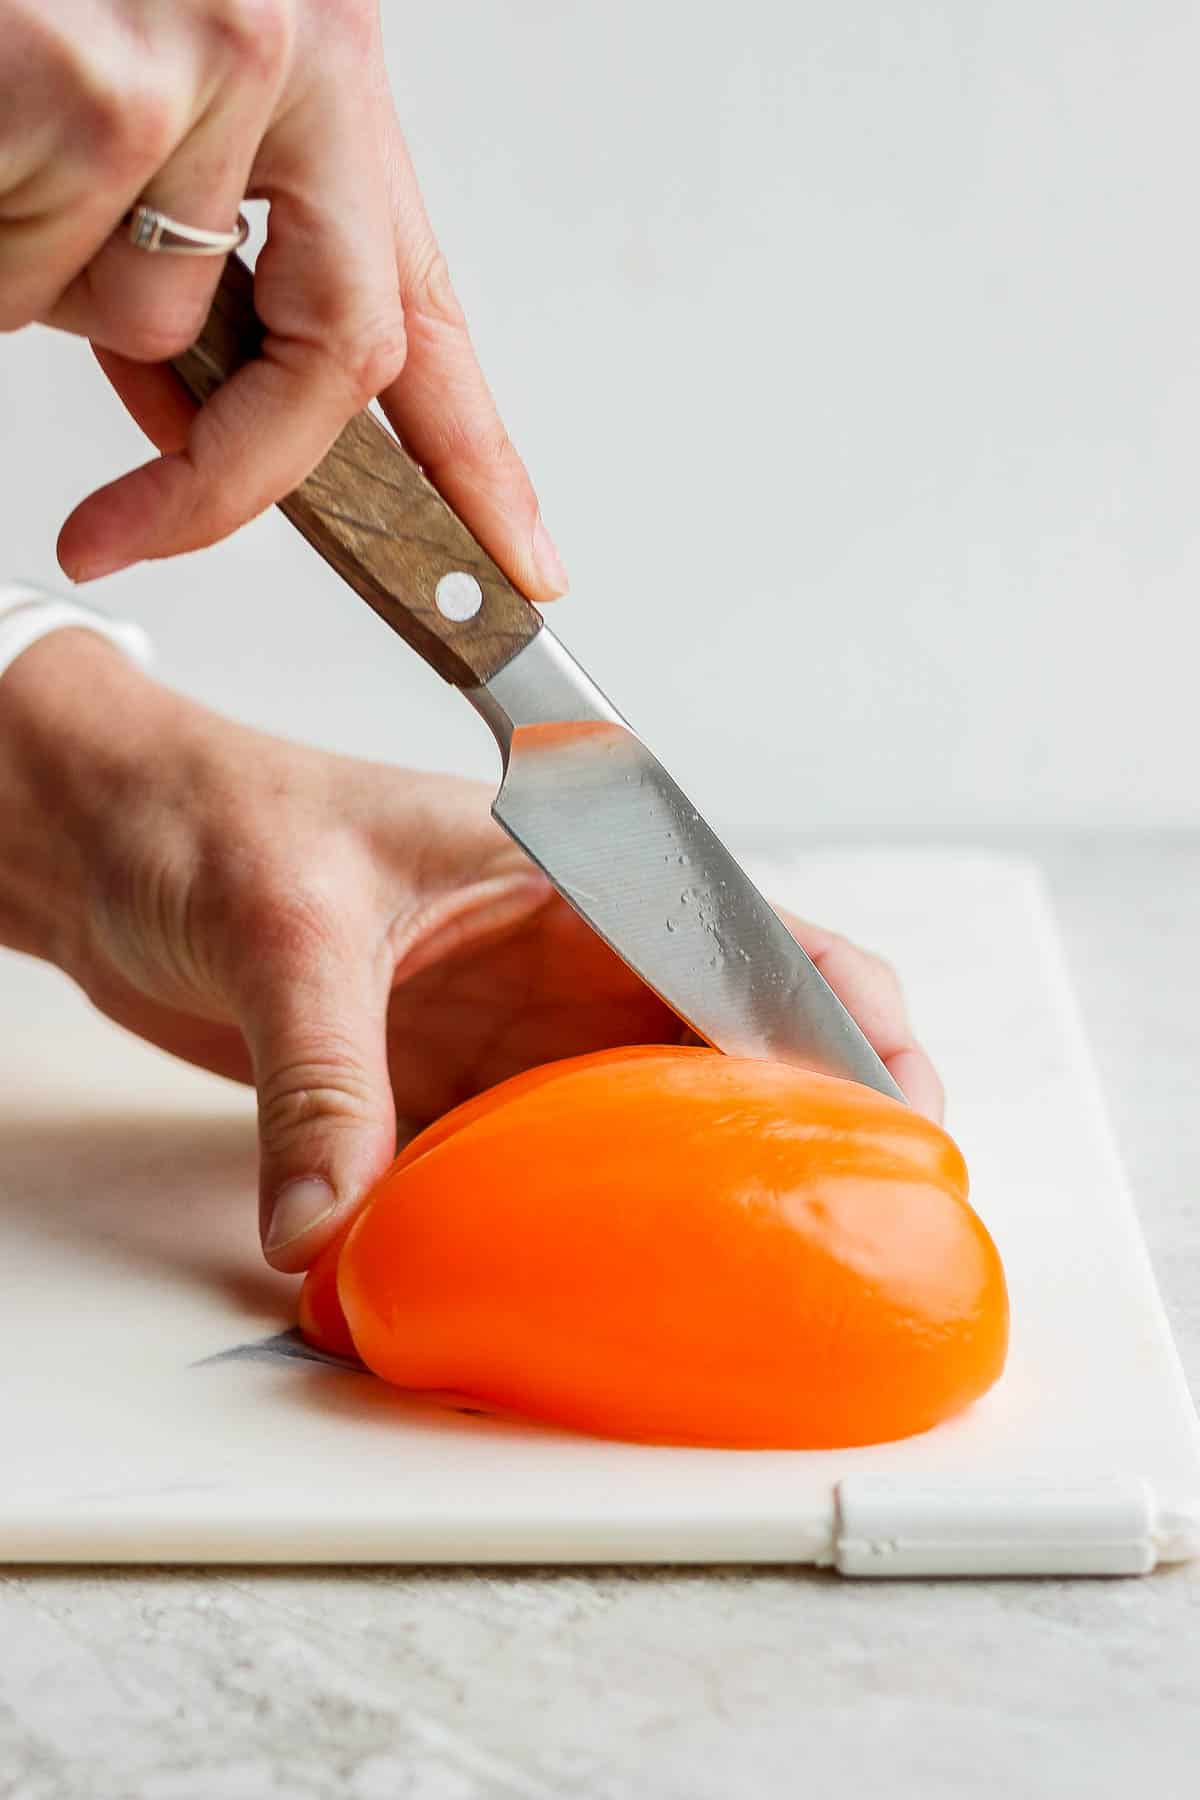 One half of a bell pepper being cut in half again to make quarters.